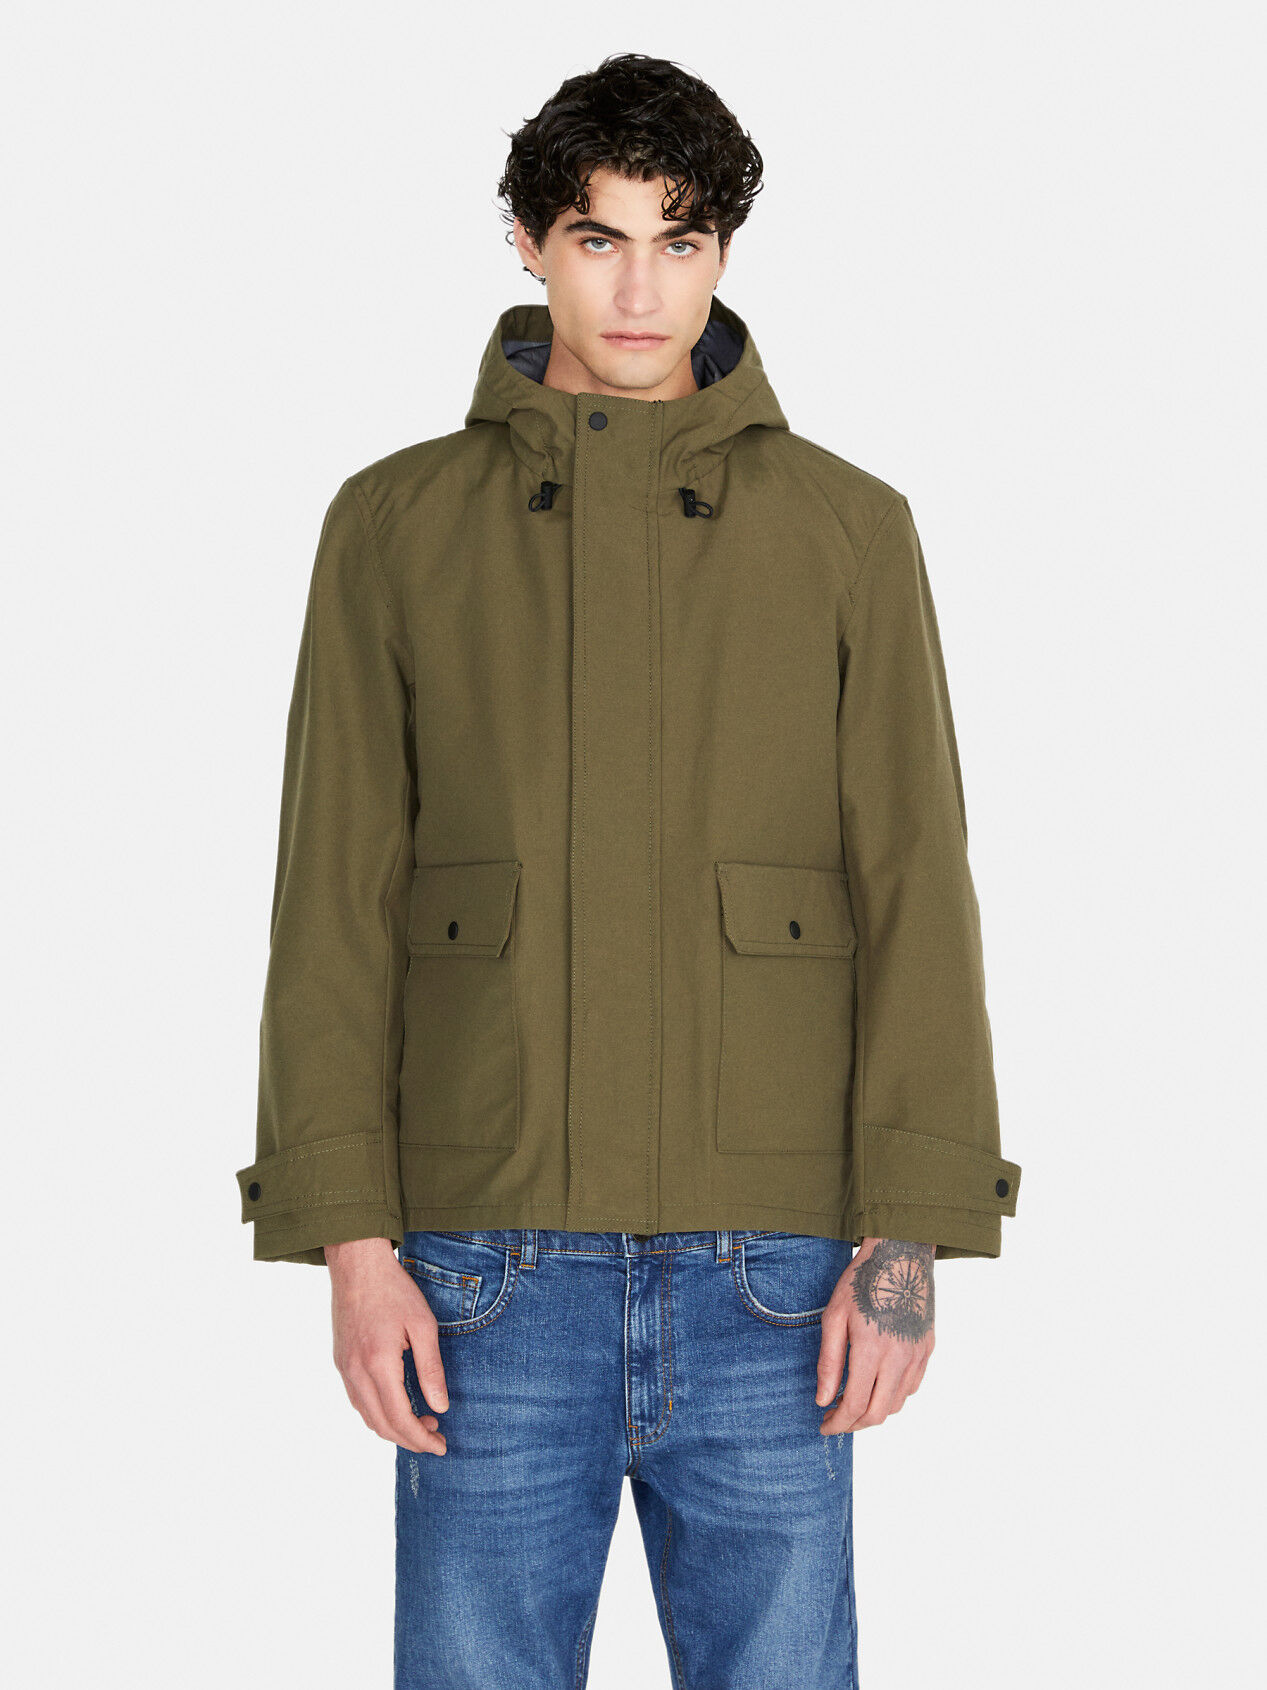 Jacket with vest, Military Green - Sisley